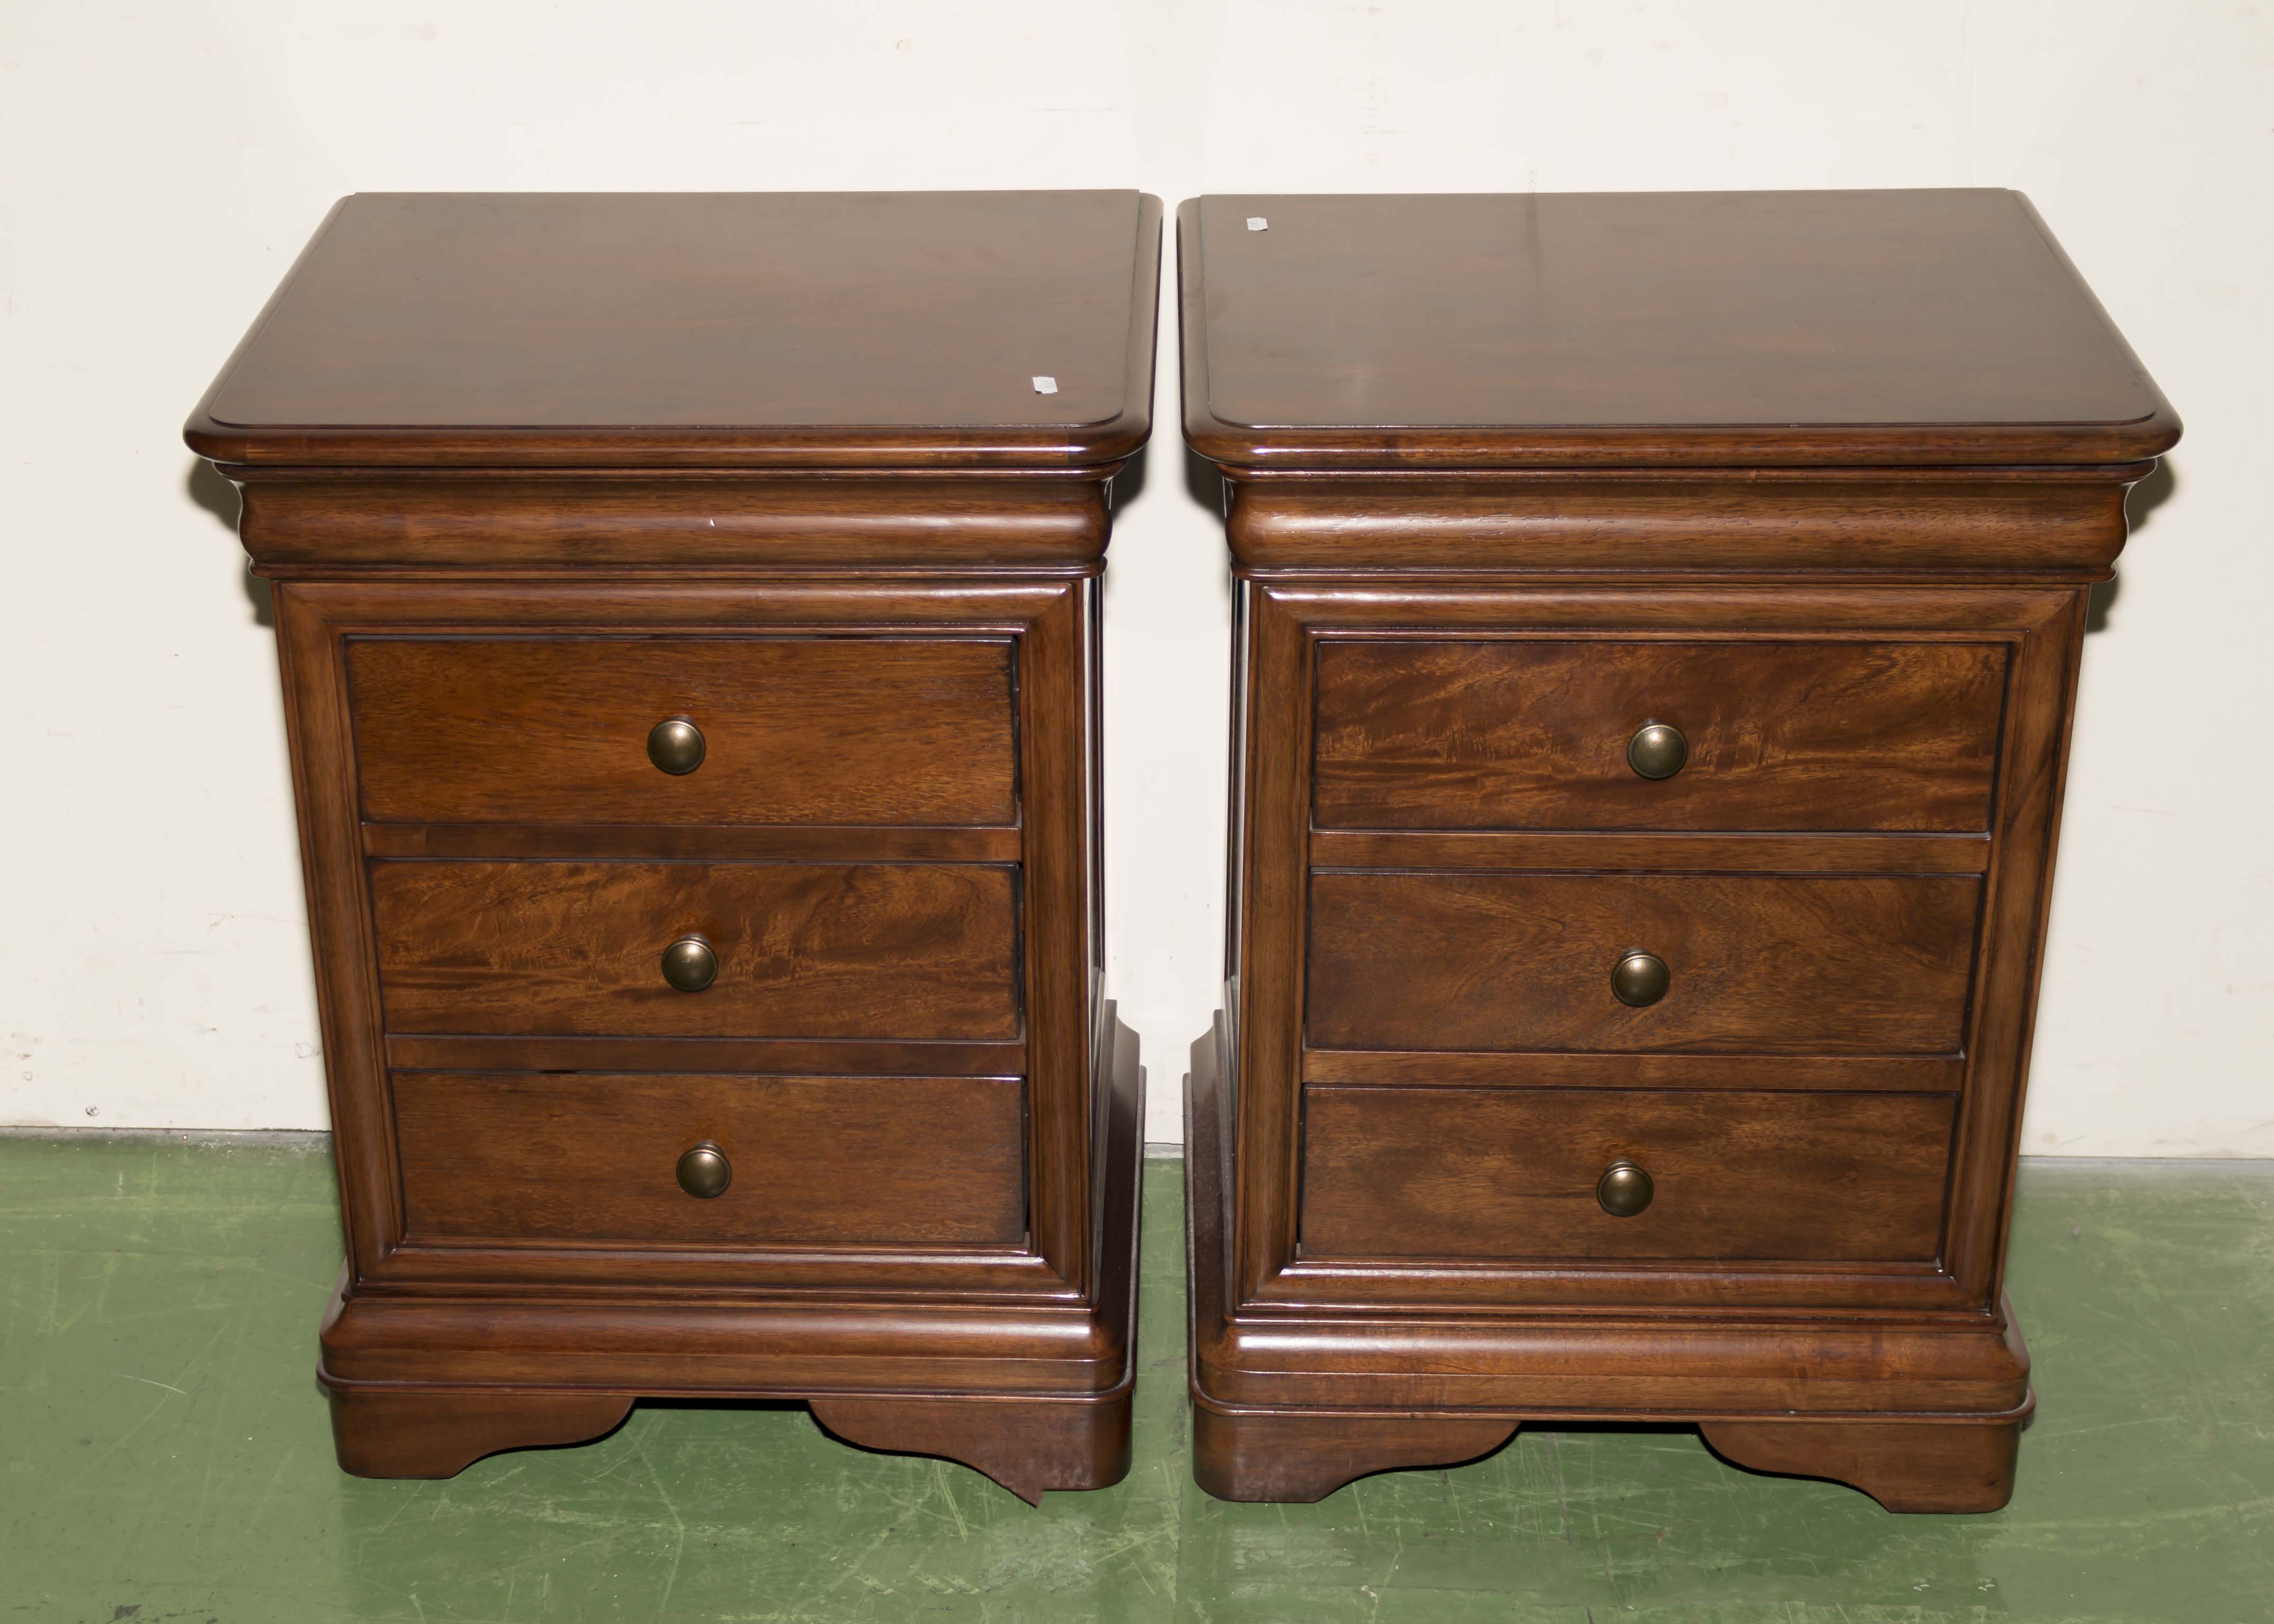 A pair of good quality mahogany bed side drawers